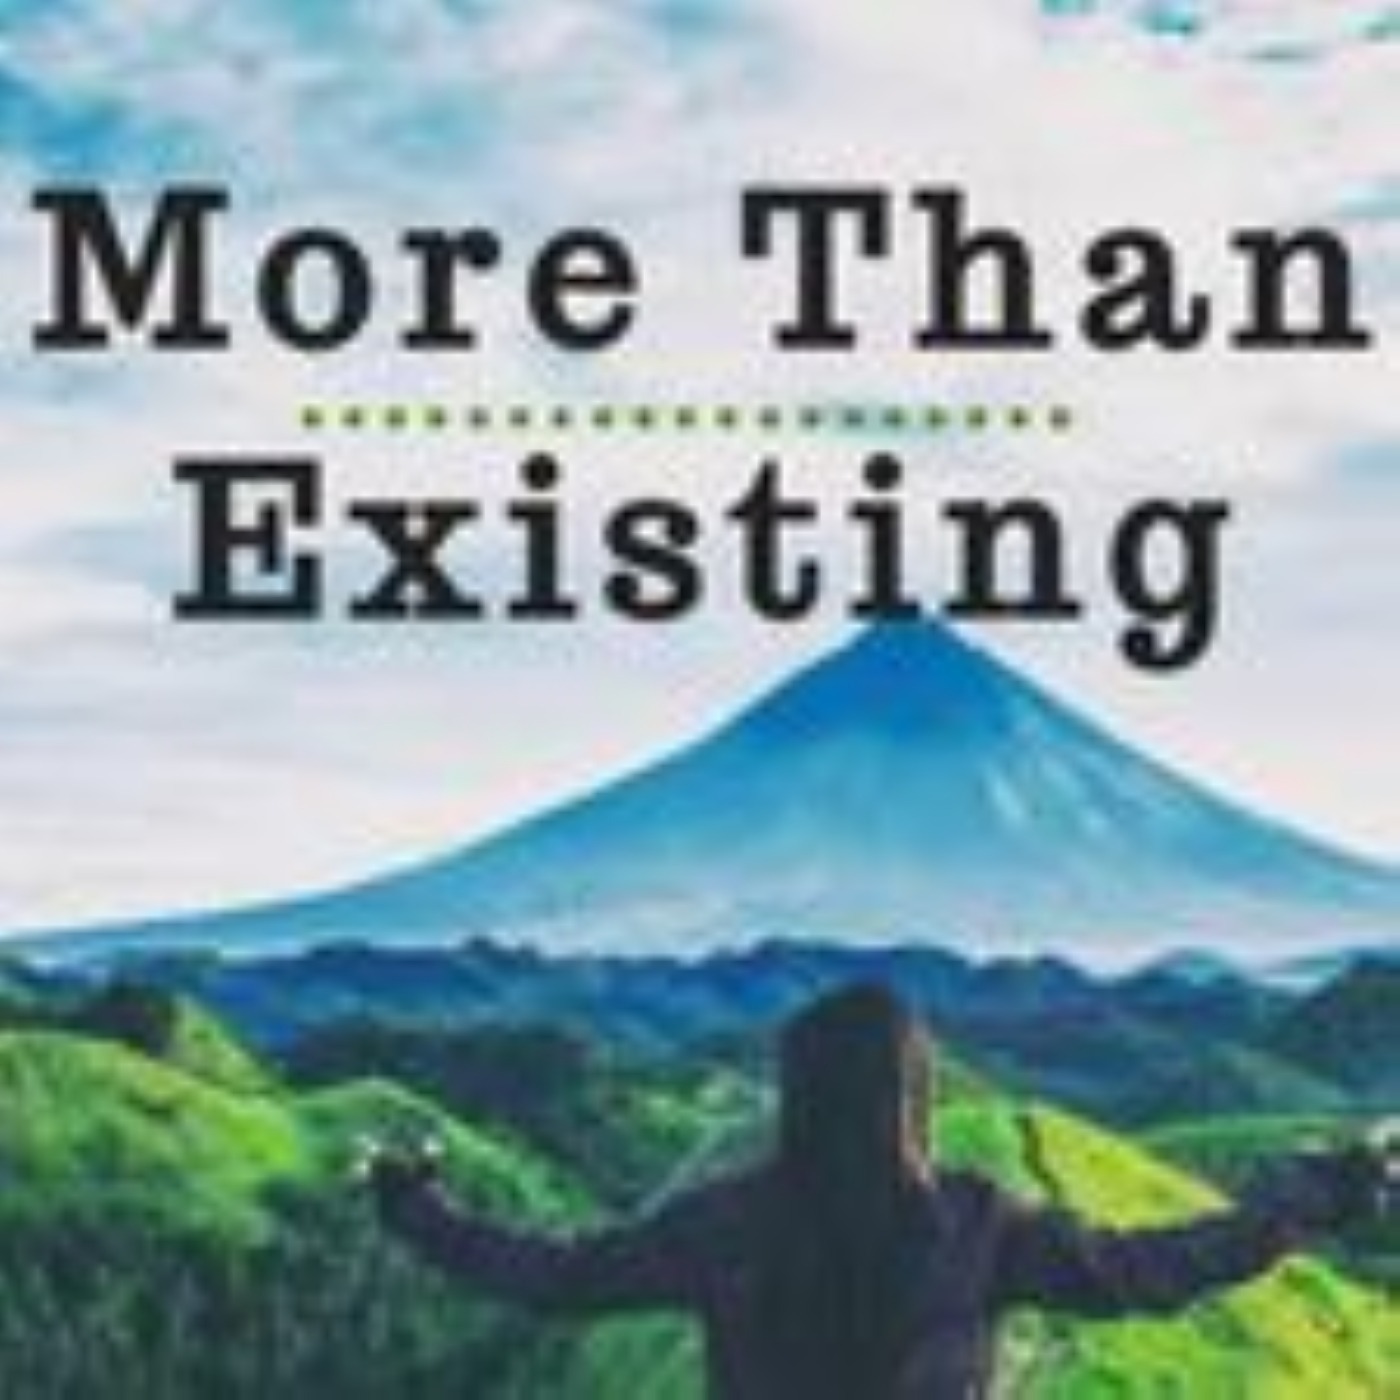 More Than Existing - My Story Part 1 (Episode 4)